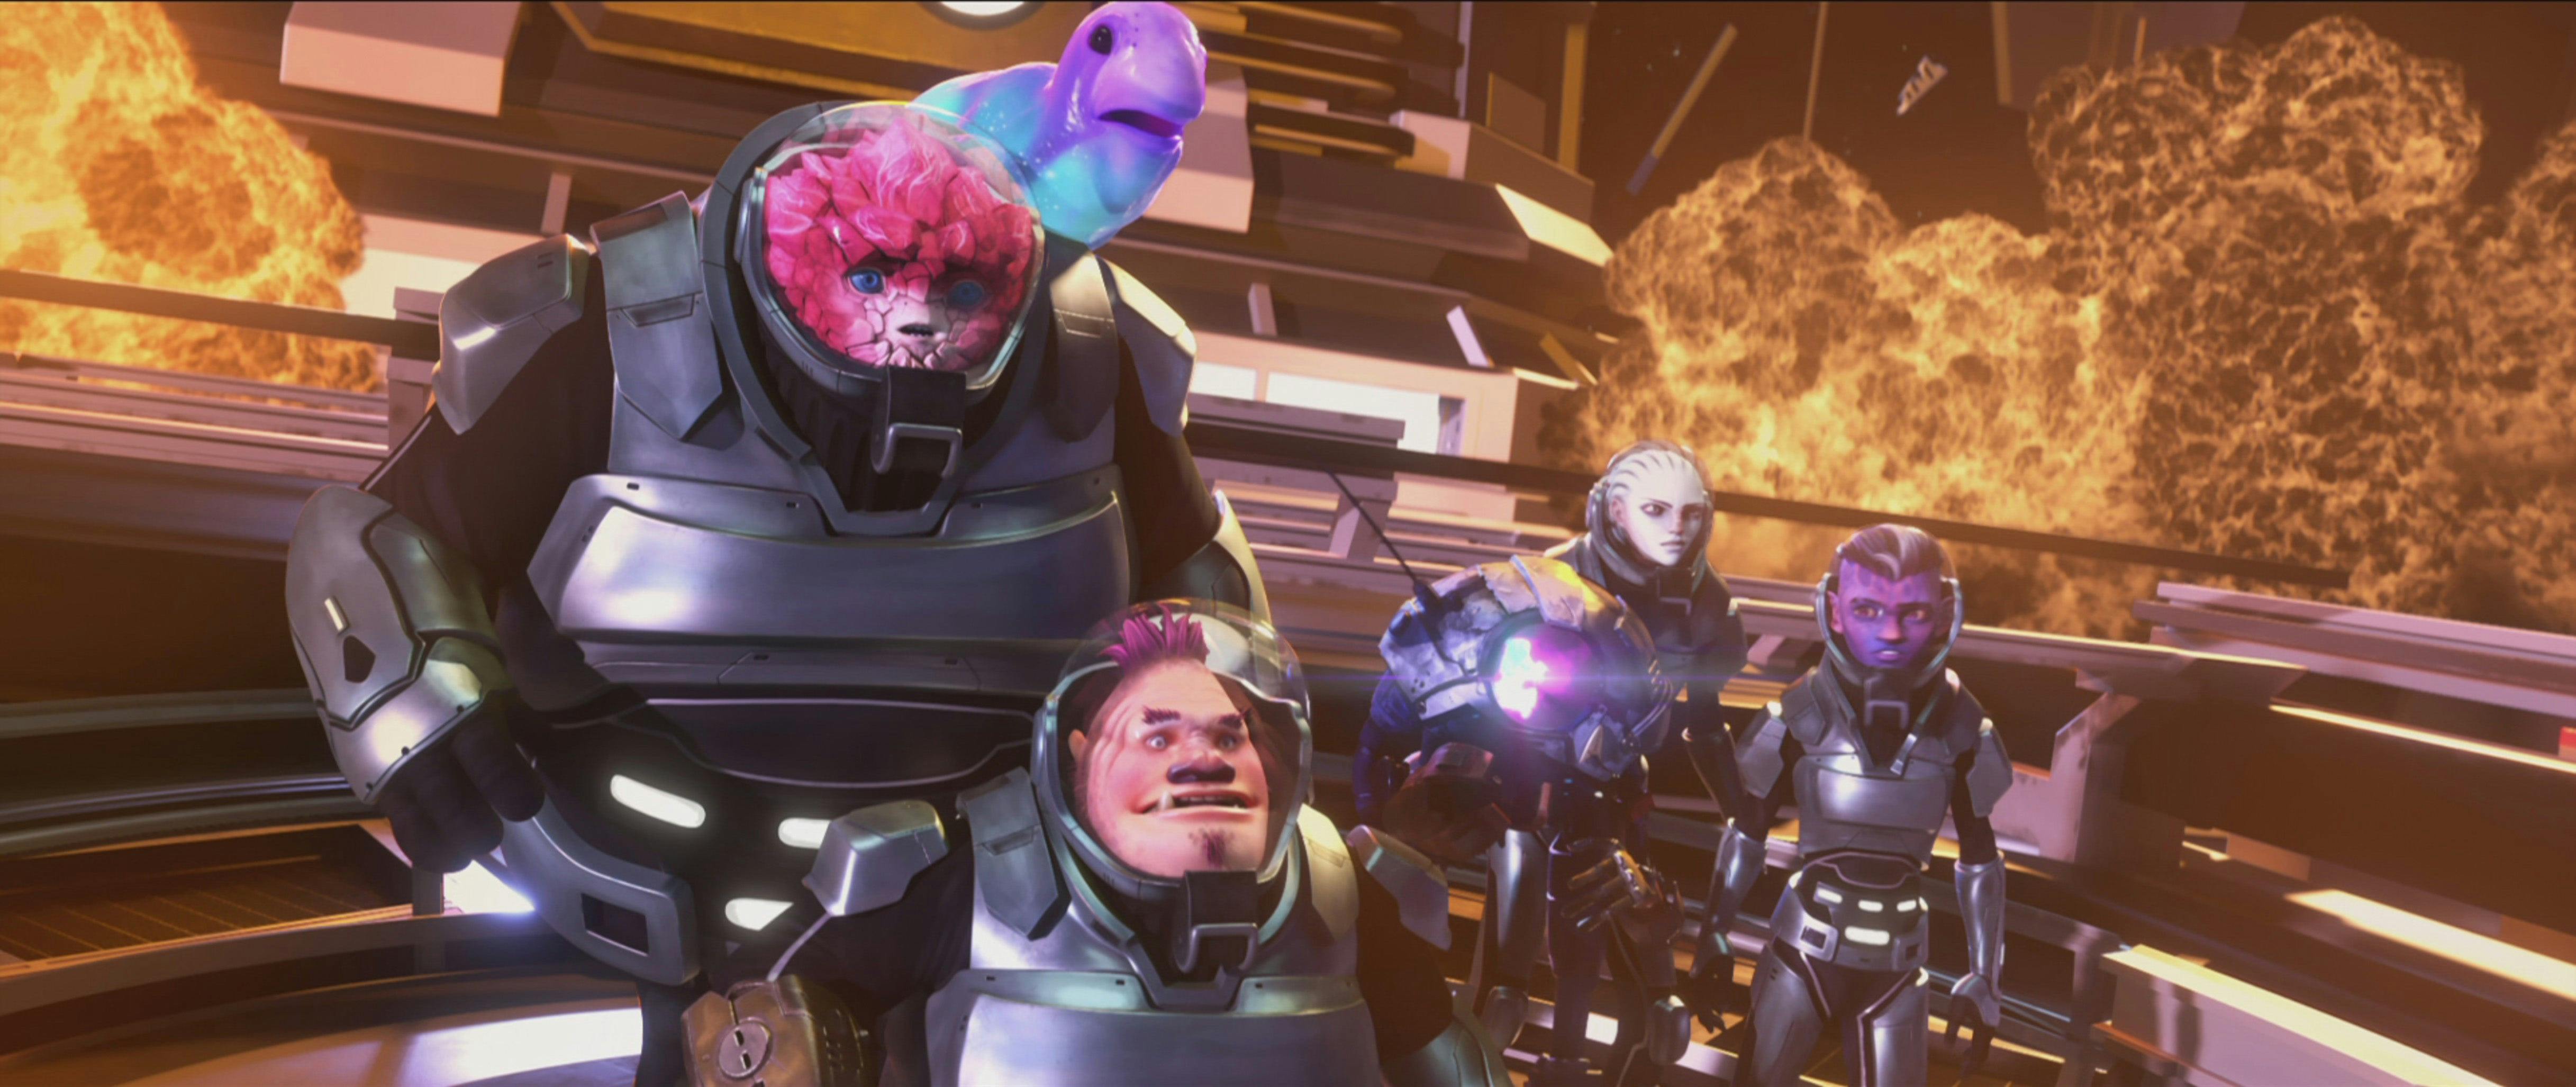 The worried Protostar crew Rok-Tahk, Murf, Jankom Pog, Gwyn, Zero and Dal wear space suits as their flanked by explosions around them on Star Trek: Prodigy